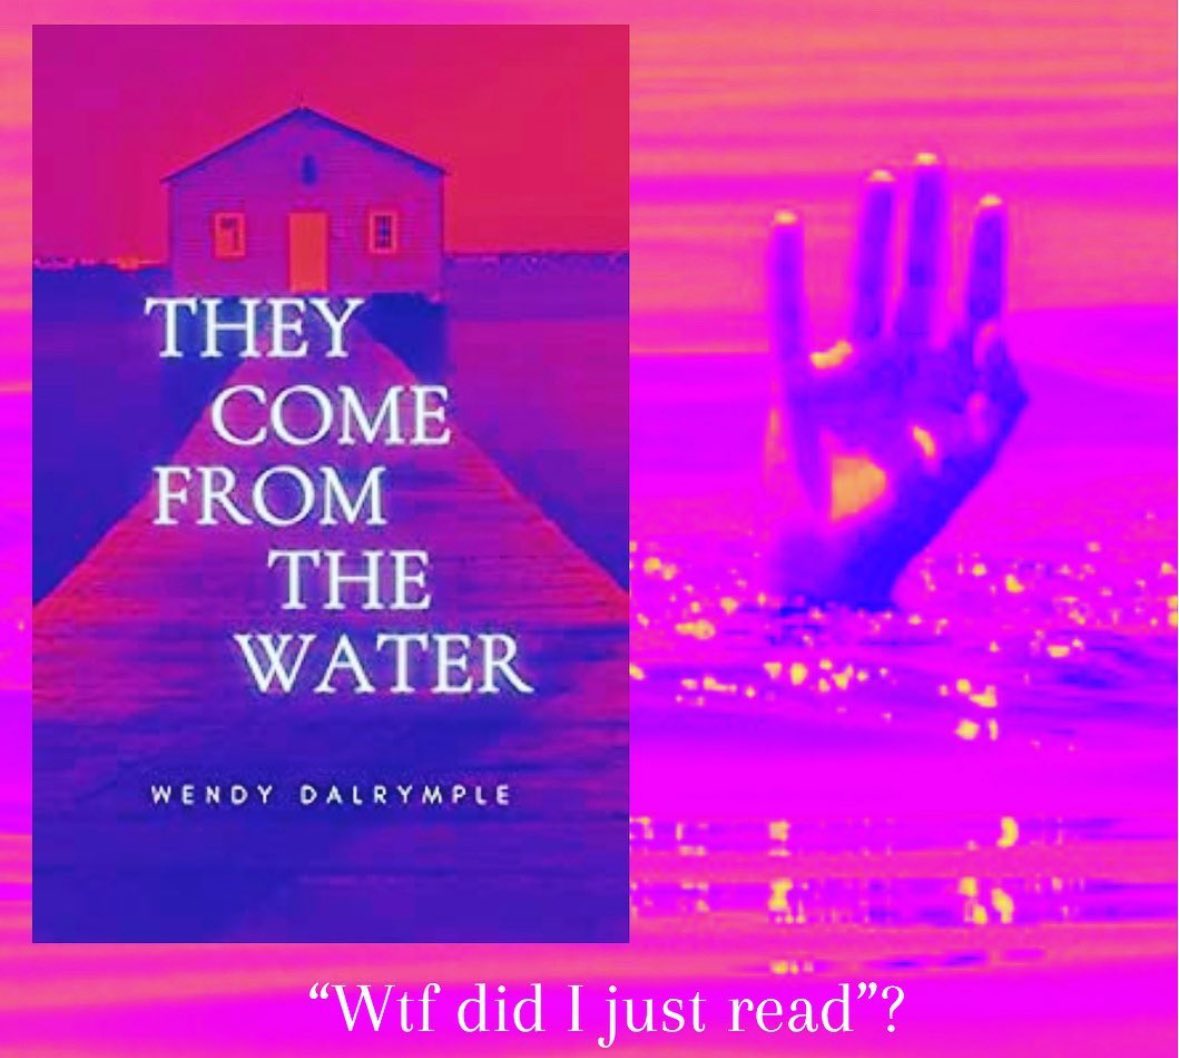 .99 ebook sale! Now through the end of the month, get my feel-bad #floridagothic horror novella THEY COME FROM THE WATER for less than a bottle of Gatorade 🐊 
#womeninhorror #womeninhorrormonth #floridabooks #floridahorror #indiehorror #ghostbook #ghoststory #gothichorror